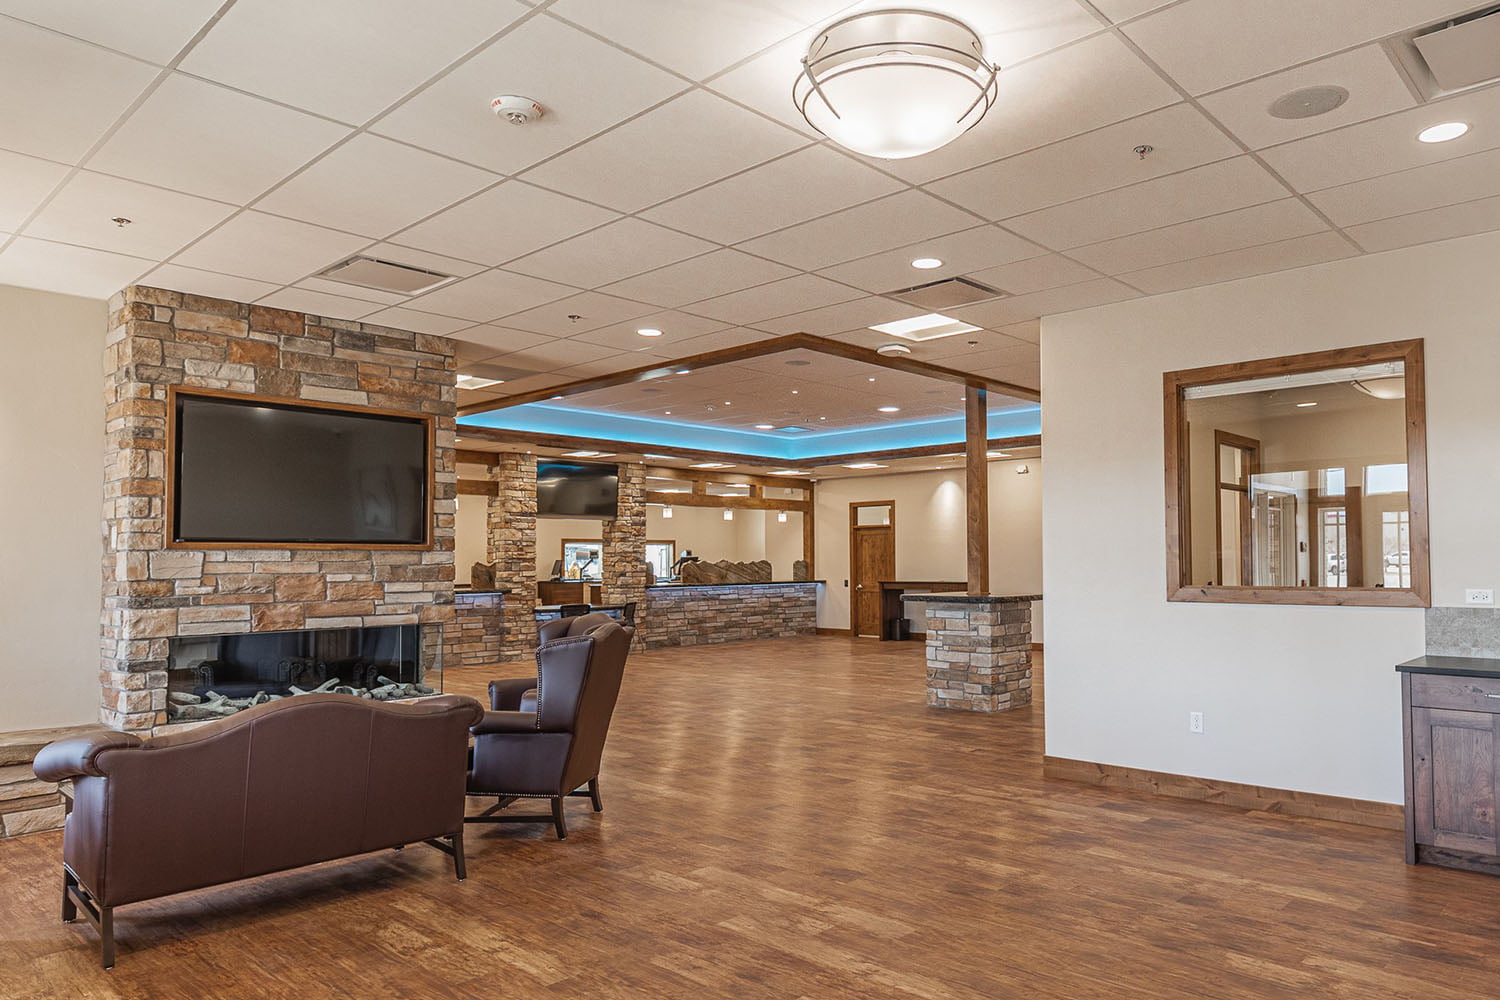 Interior of the Home Loan State Bank remodel in Montrose